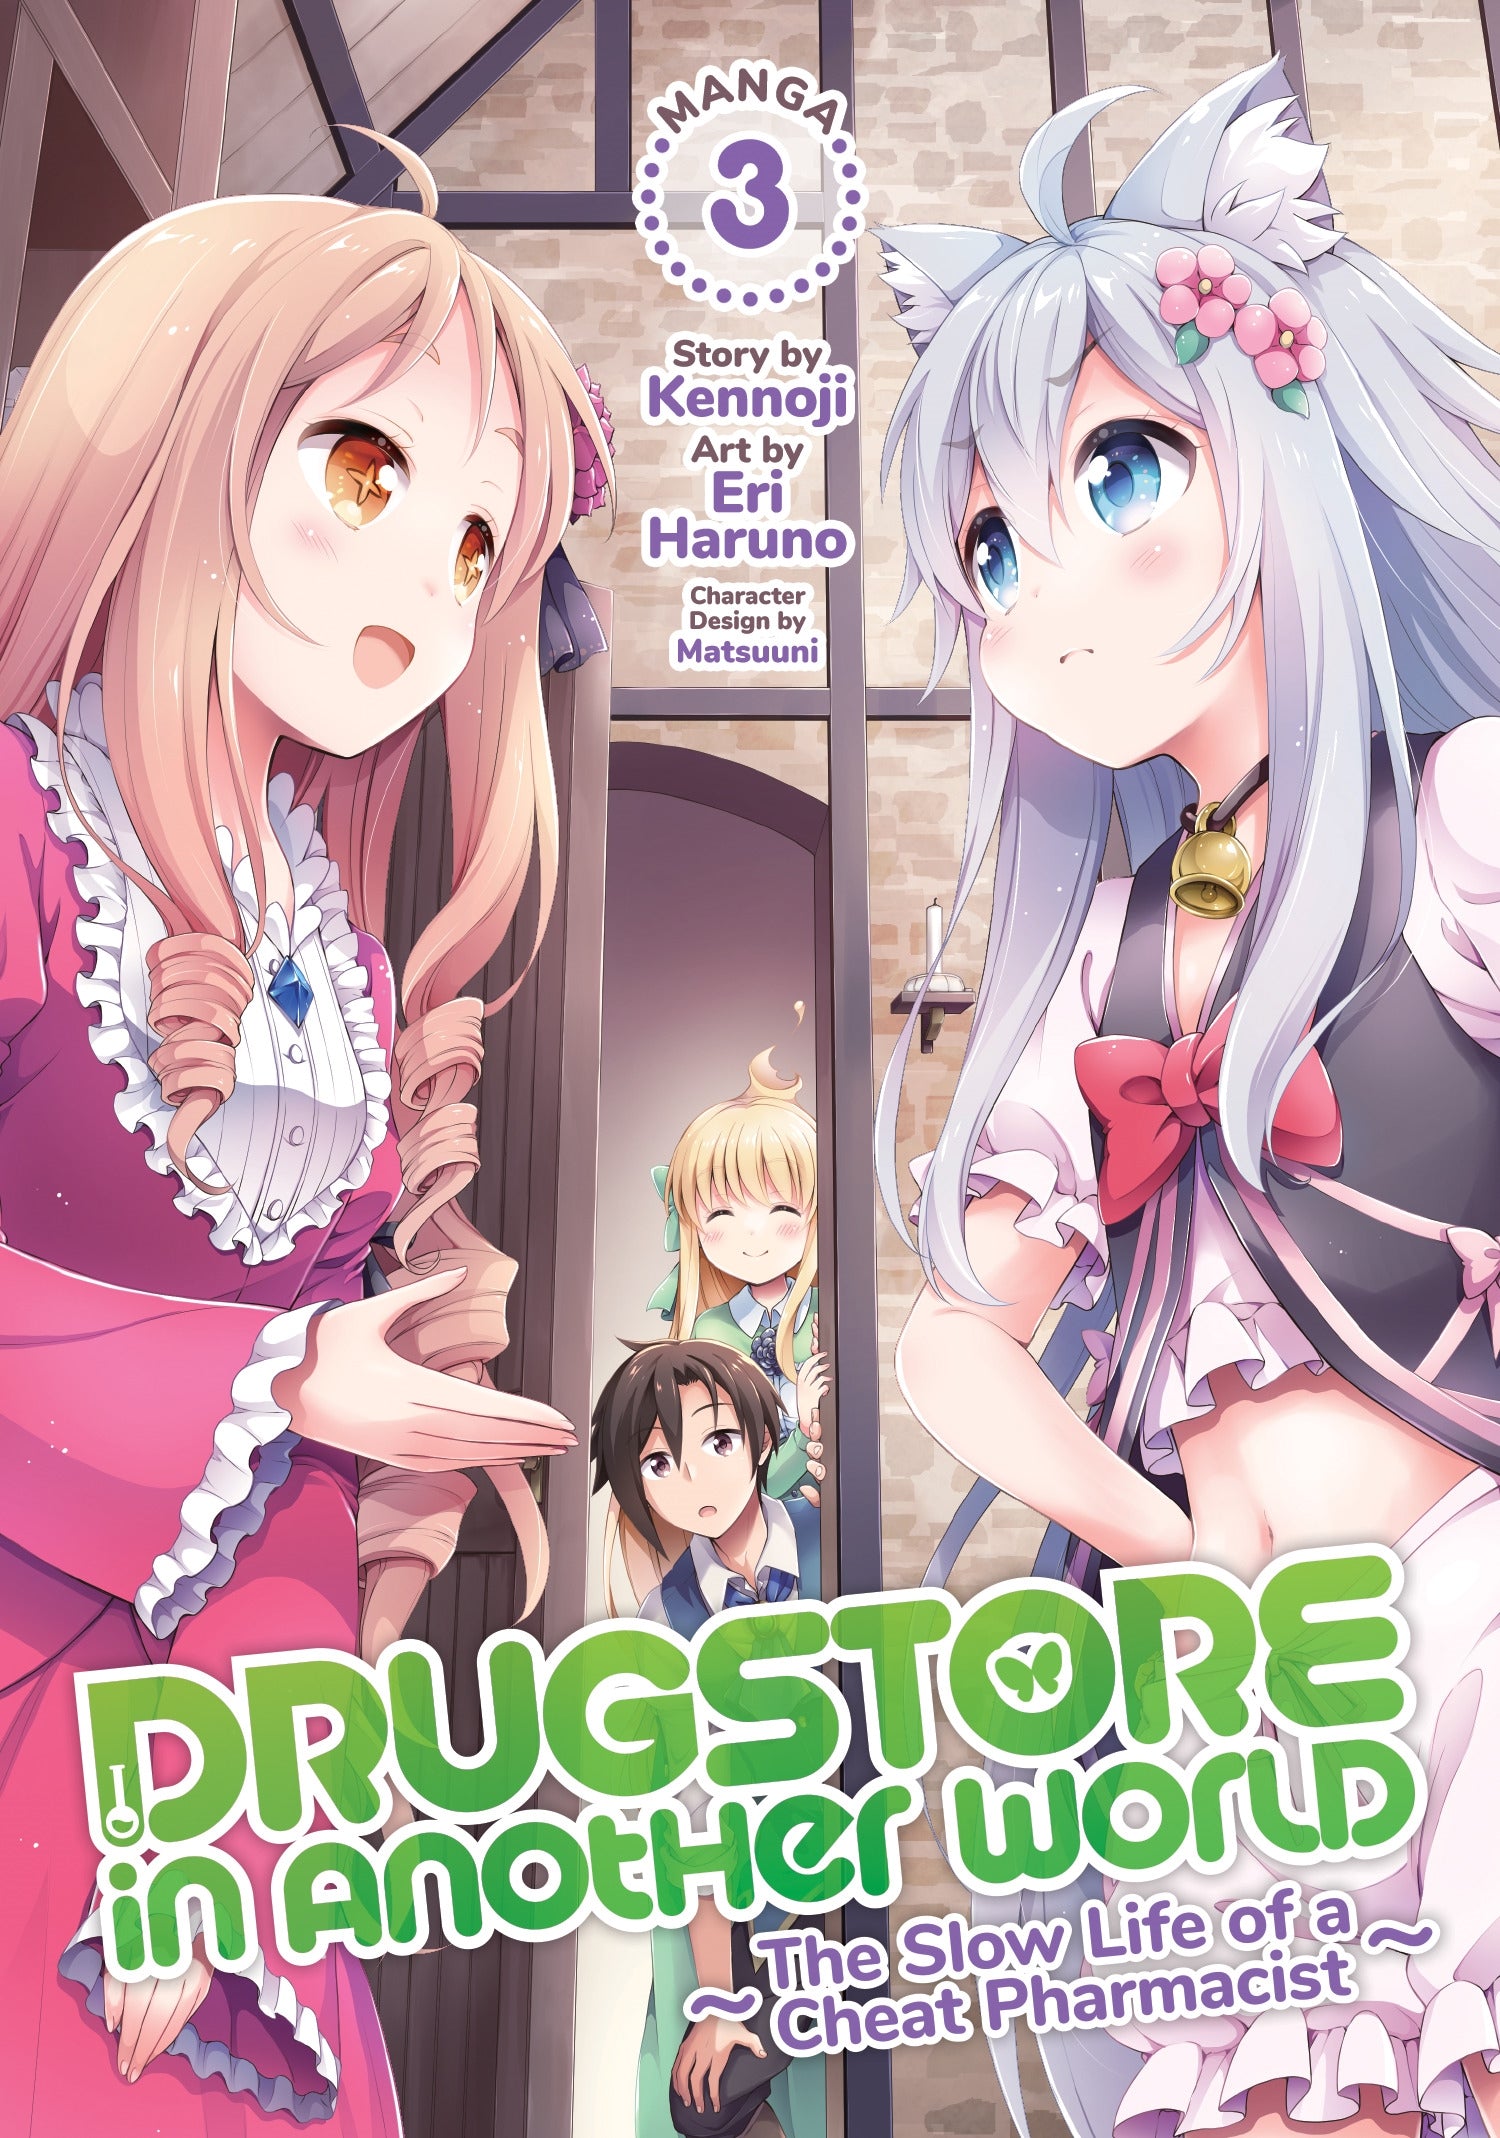 Drugstore in Another World : The Slow Life of a Cheat Pharmacist (Manga) Vol. 3 - Manga Warehouse